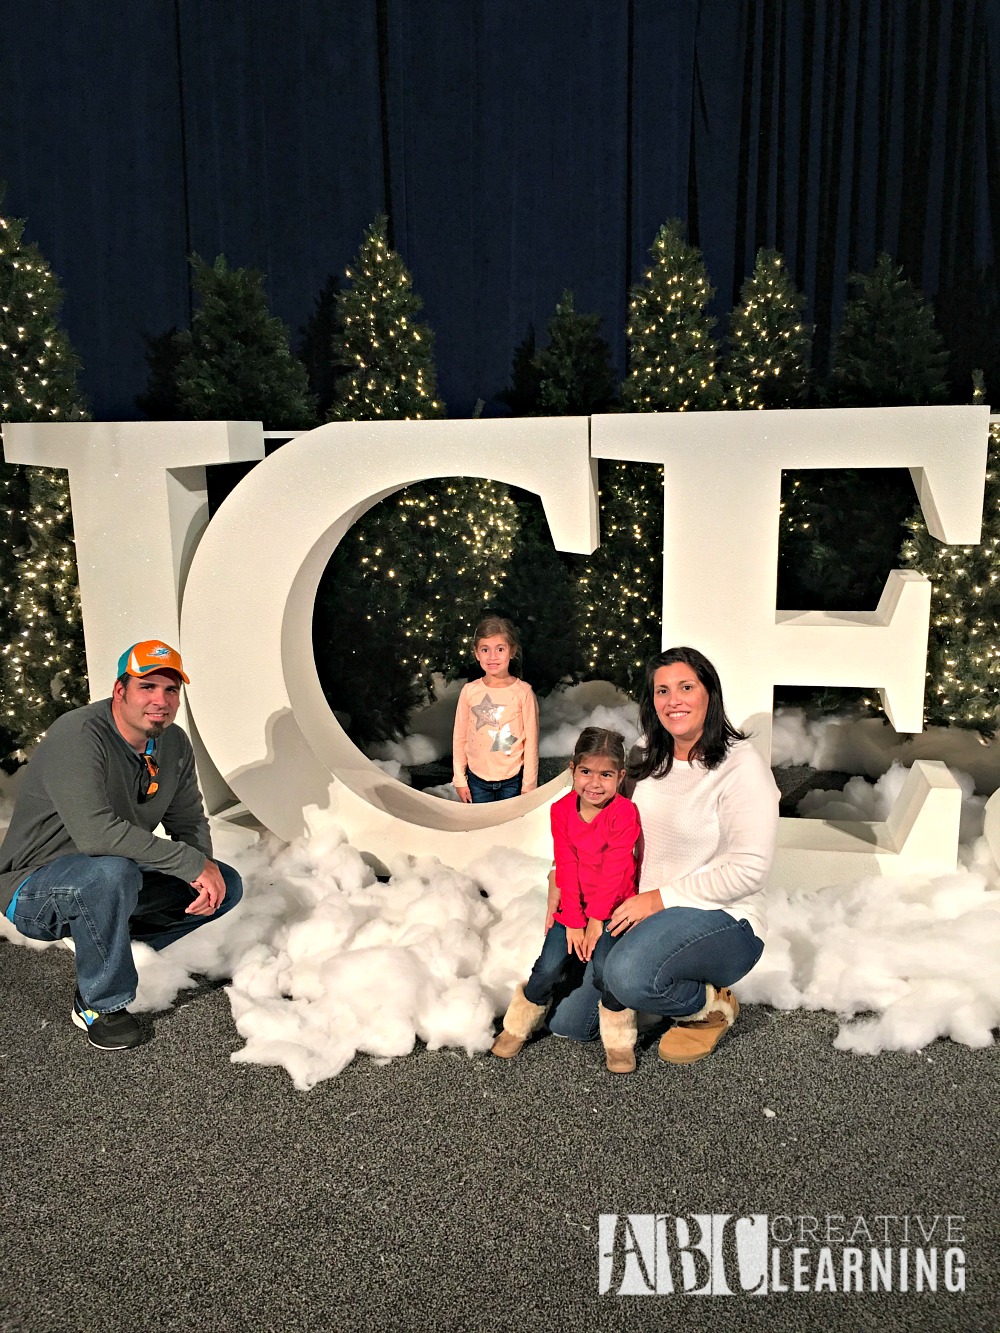 7 Reasons to Visit Gaylord Palms and ICE During Christmas Birthday